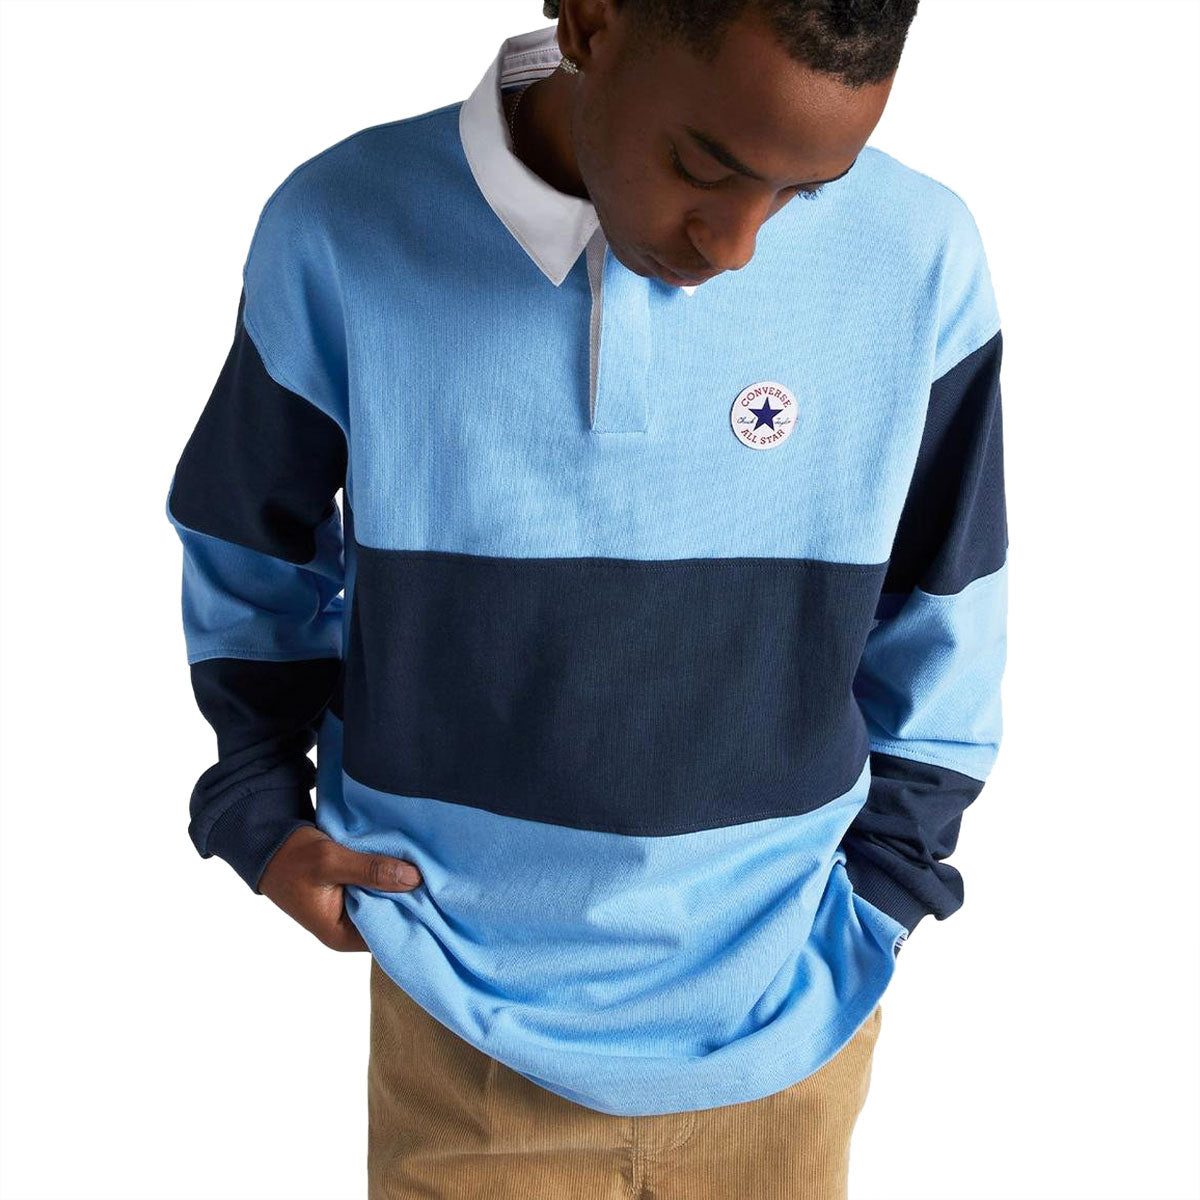 Converse All Star Long Sleeve Rugby Jersey - Navy/Light Blue image 2